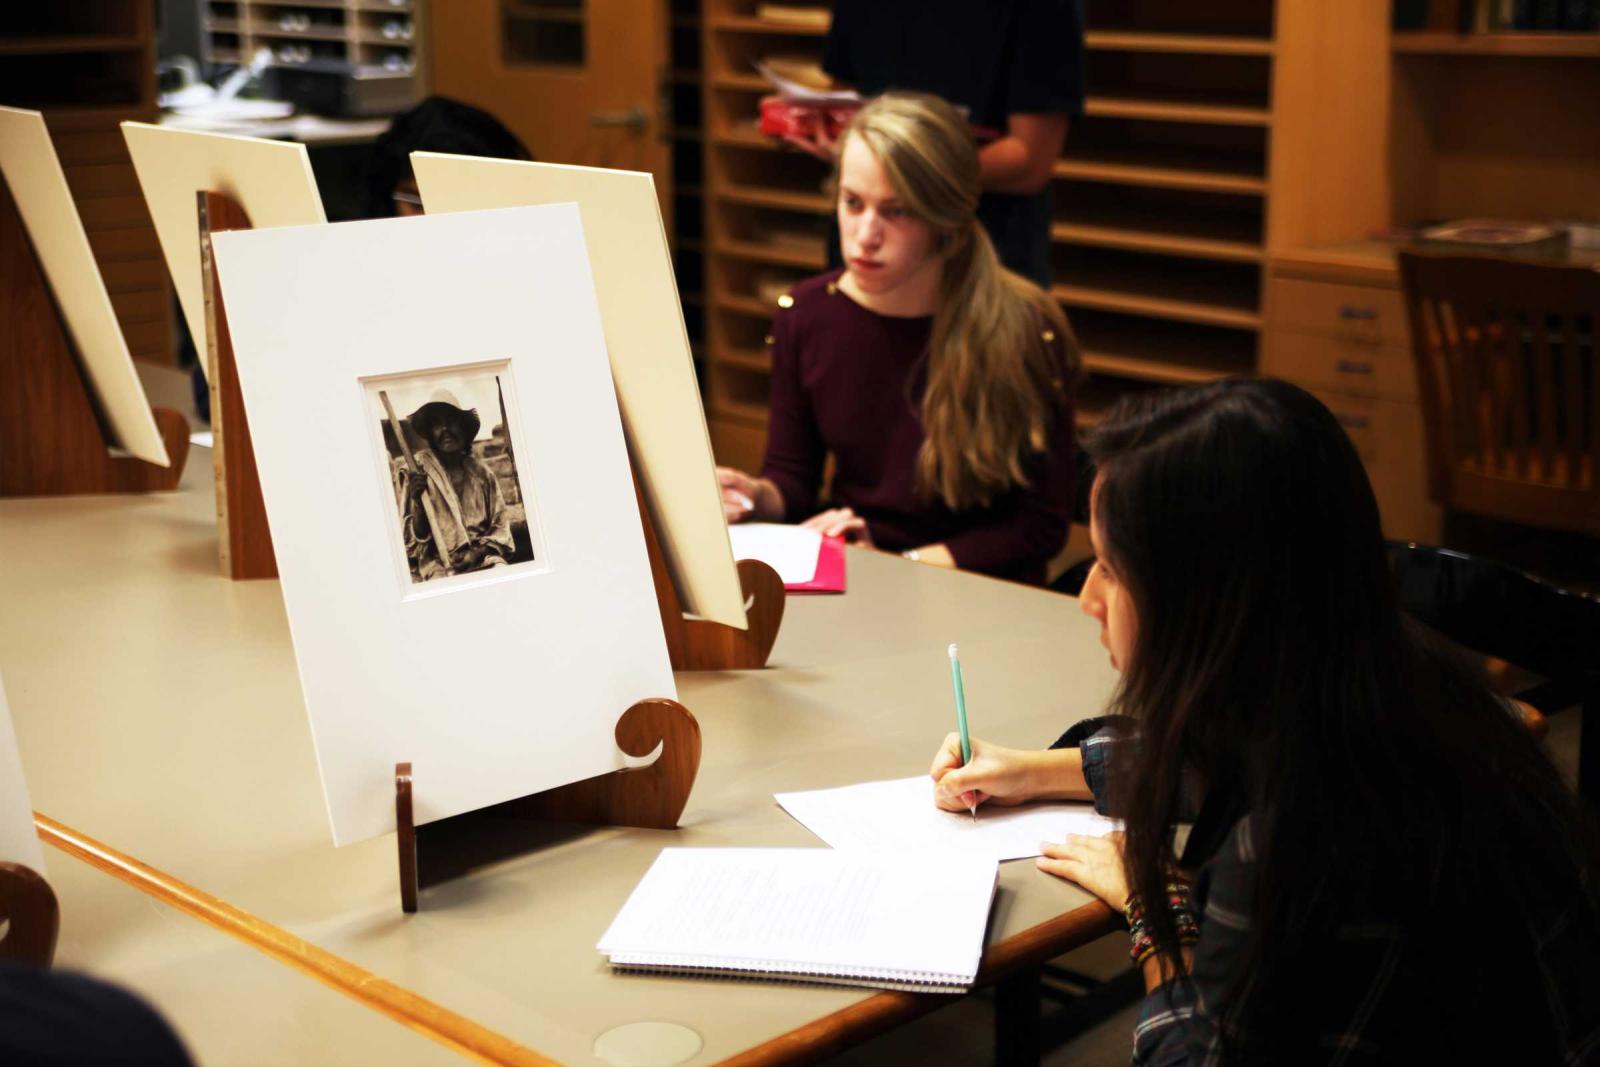 Two women sit studying artworks on a table in front of them, they take notes as they look.